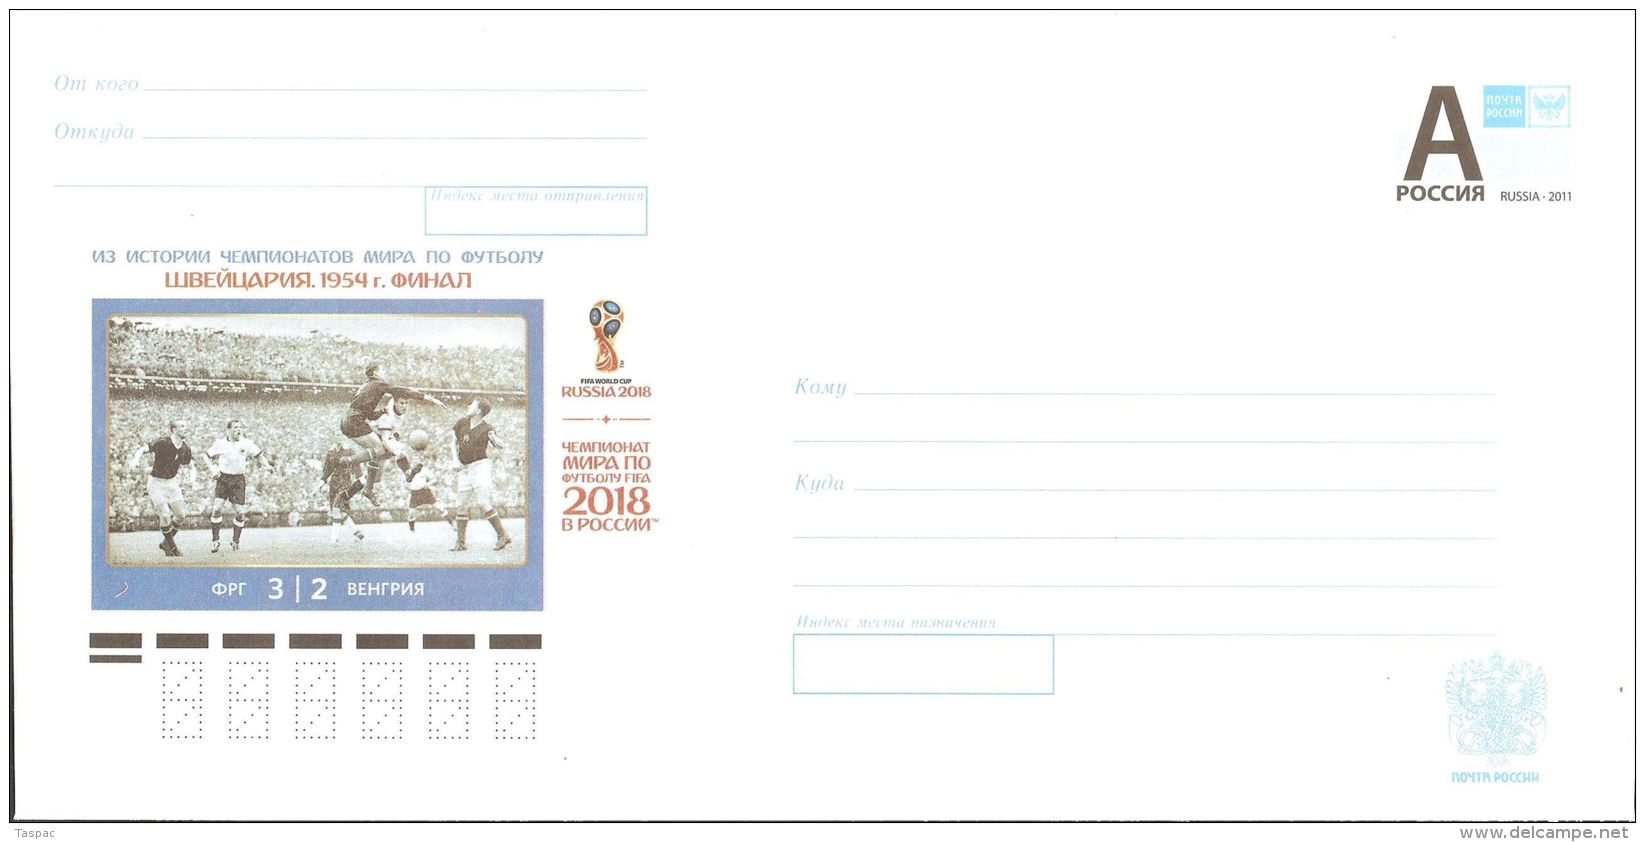 Russia 2015 # 147 Postal Stationery Cover Unused - History Of World Cup Soccer Championship, Switzerland 1954 - 1954 – Schweiz